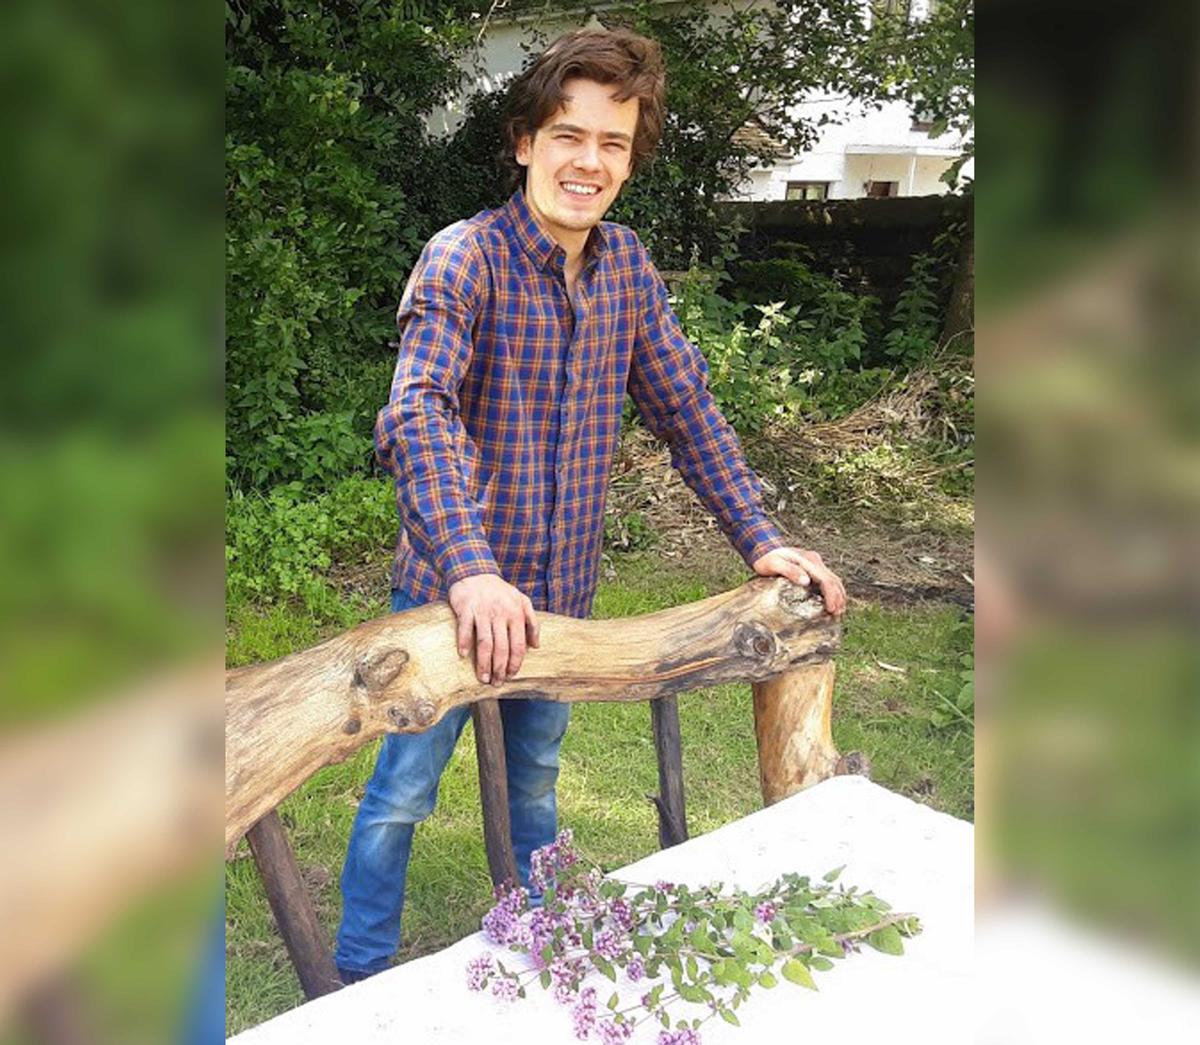 Billy Walden with his rustic new bed made out of driftwood (Caters News)